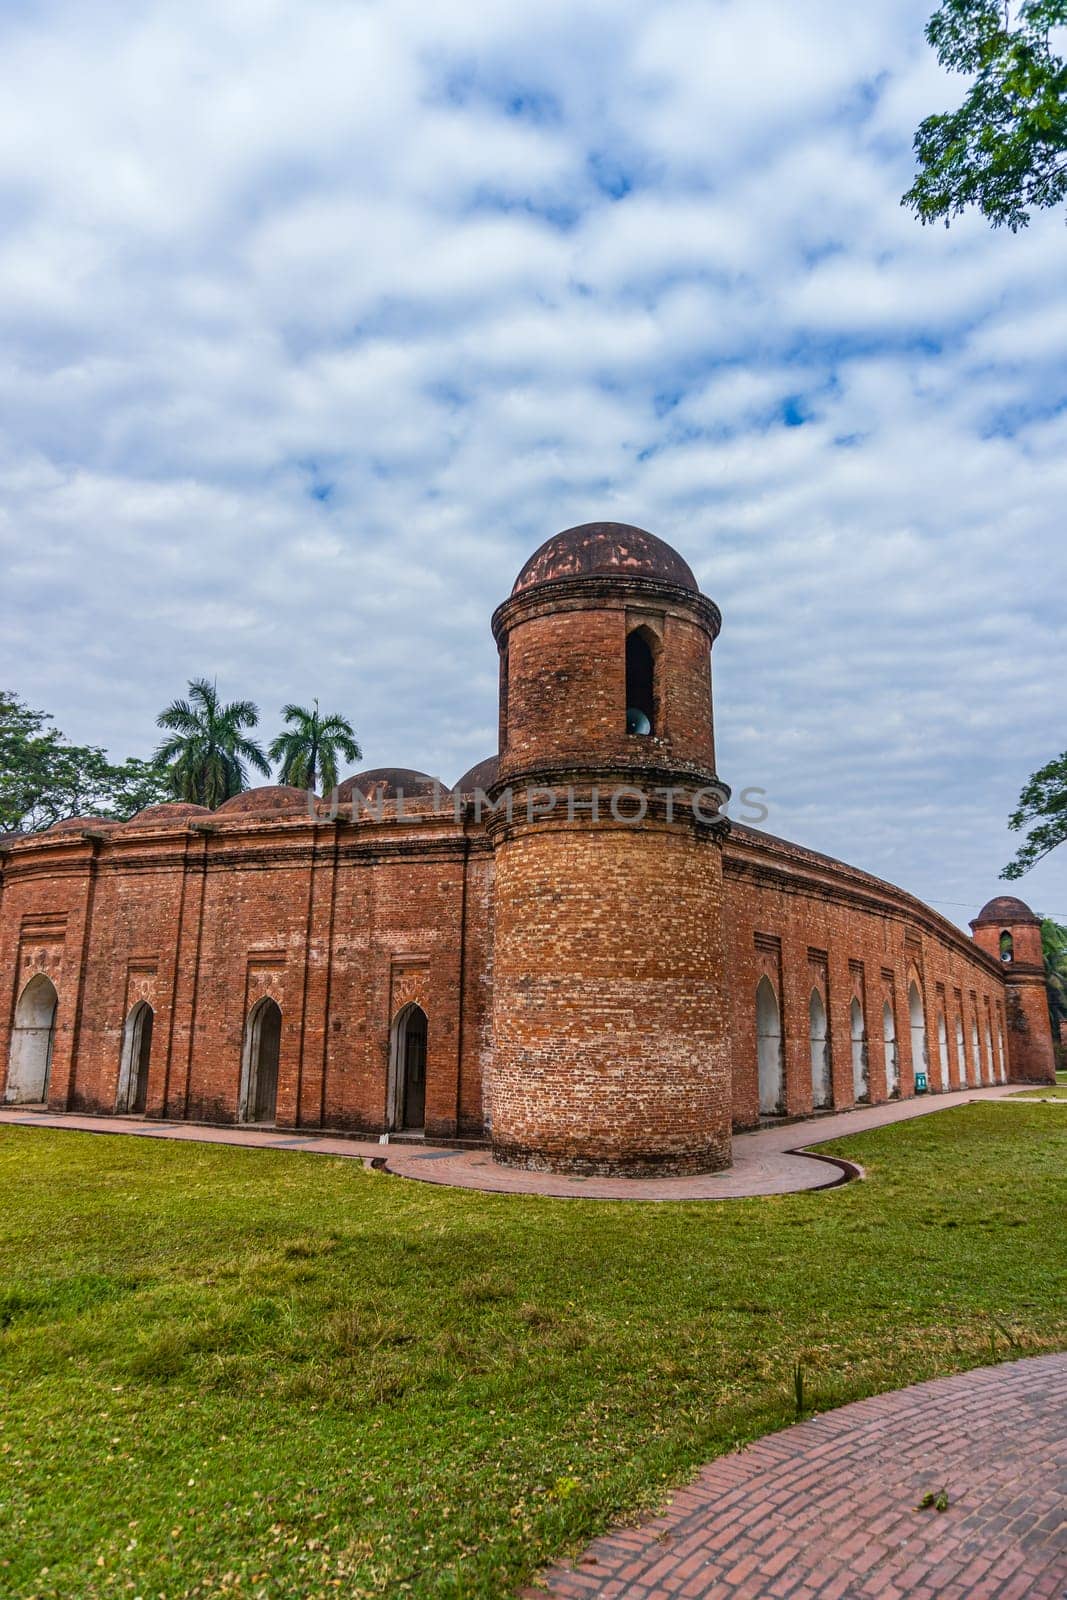 The Sixty Dome Mosque in Bagerhat, Khulna, Bangladesh by abdulkayum97